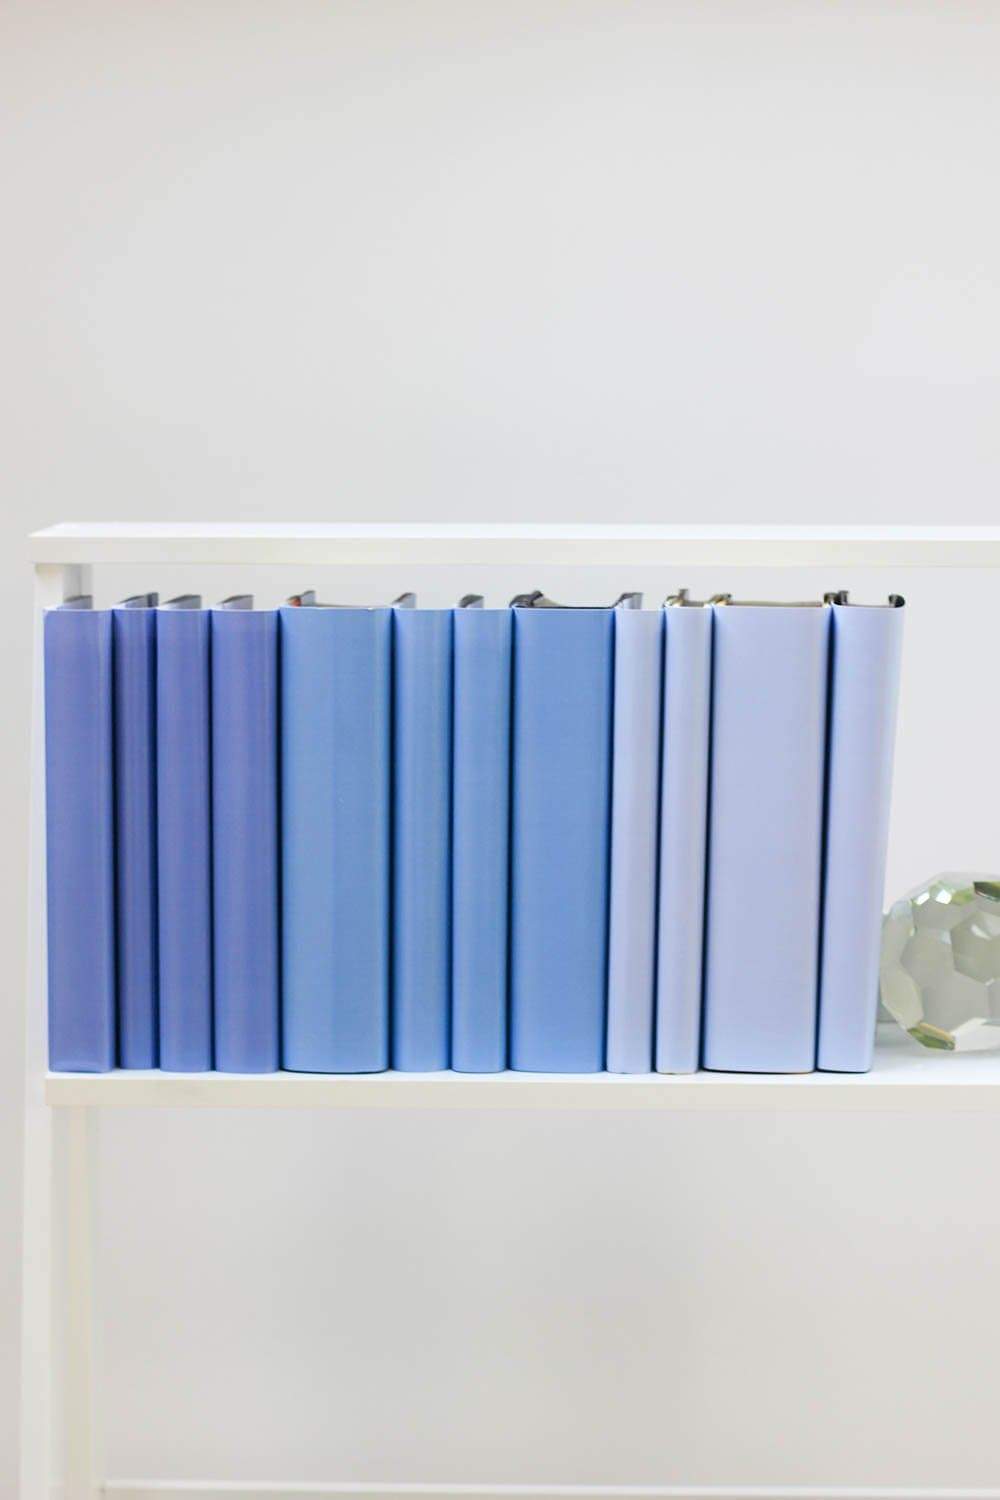 Set of styled periwinkle books made with periwinkle book covers